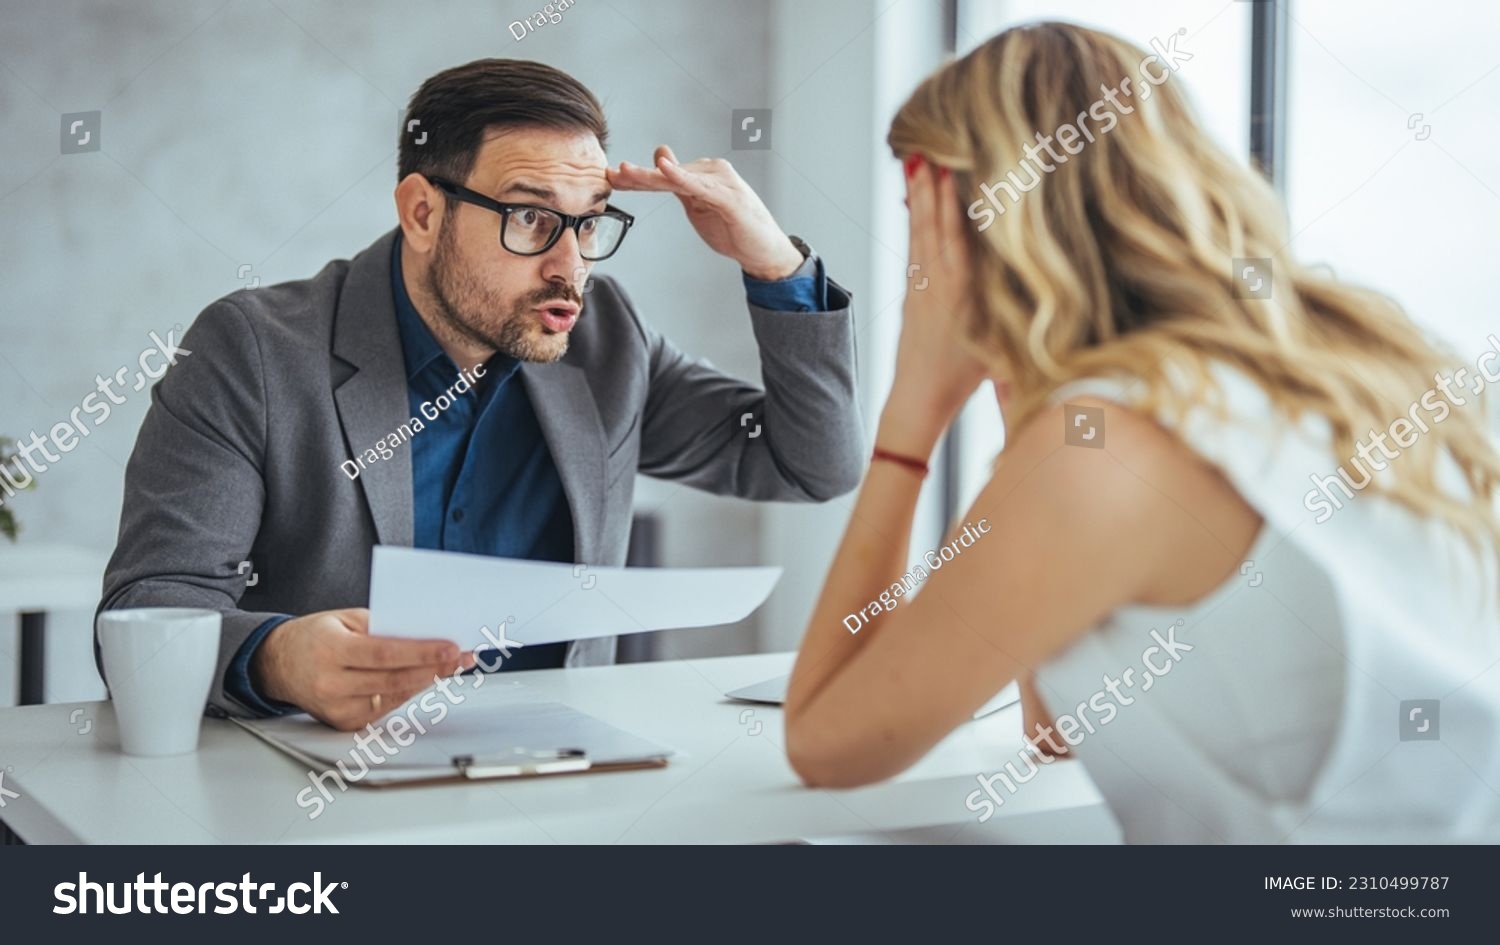 Boss threatening with finger his employee in office. Angry mean boss yelling at employee for missing deadline, executive manager scolding ineffective salesman showing bad work results #2310499787